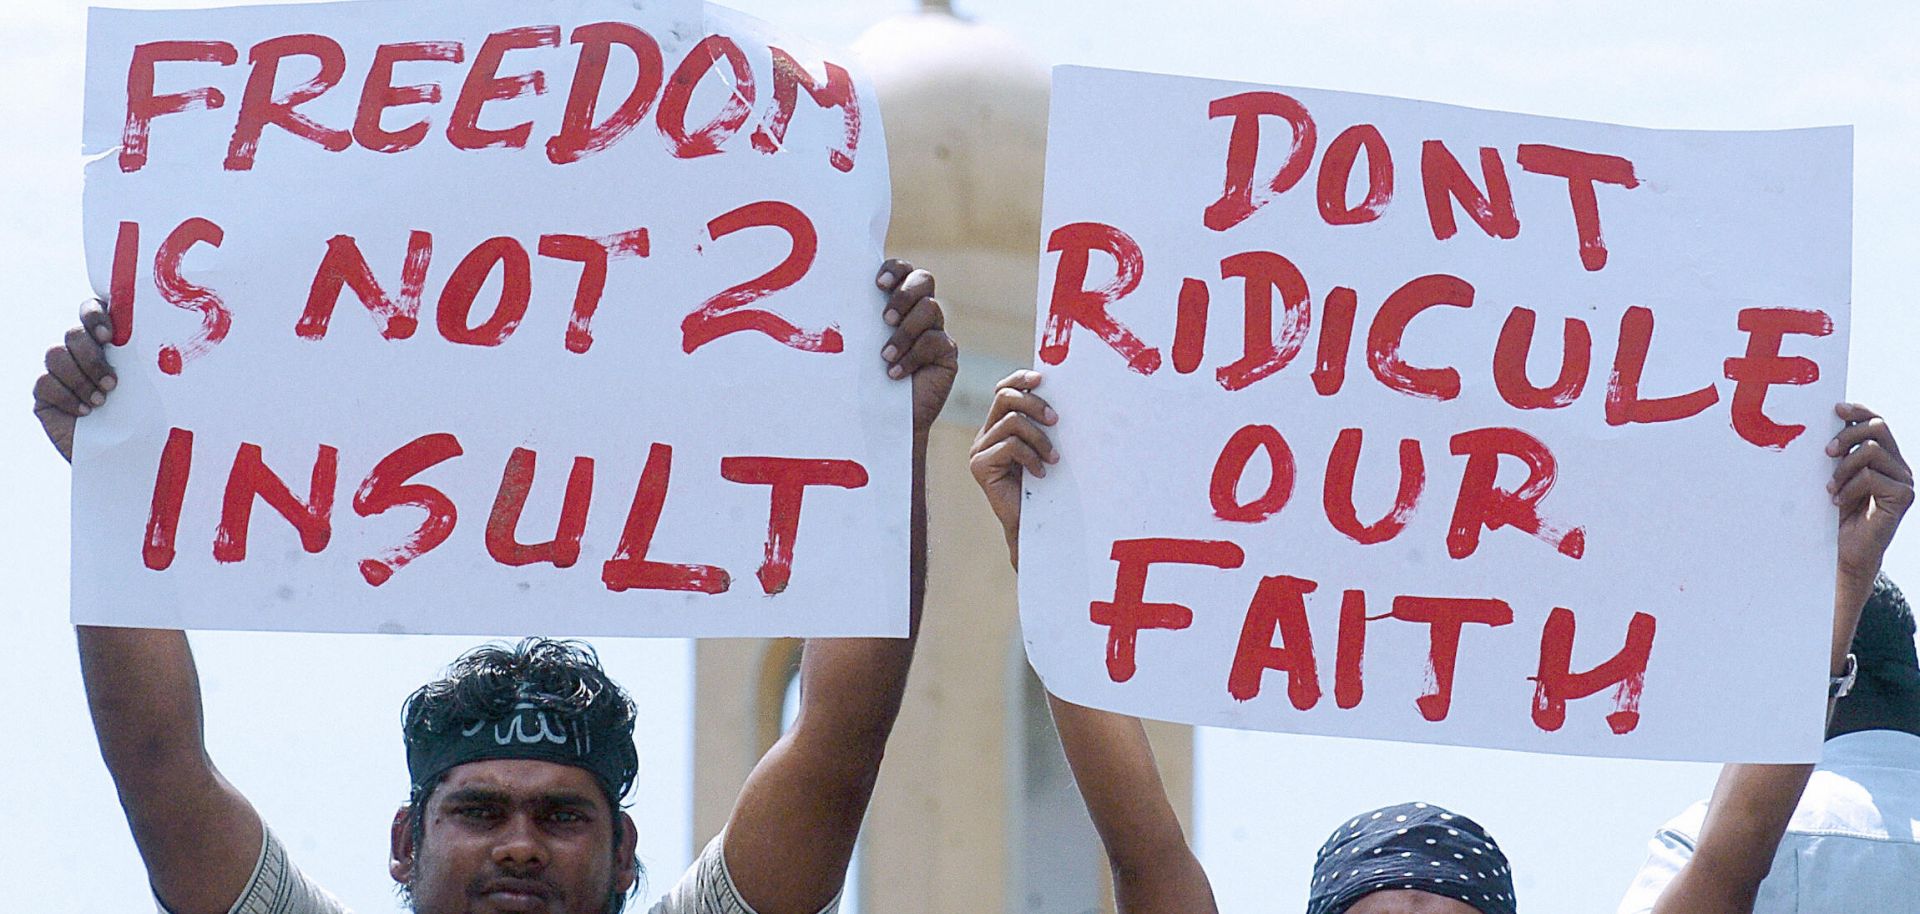 Sri Lankan Muslims pose with placards during a rally.